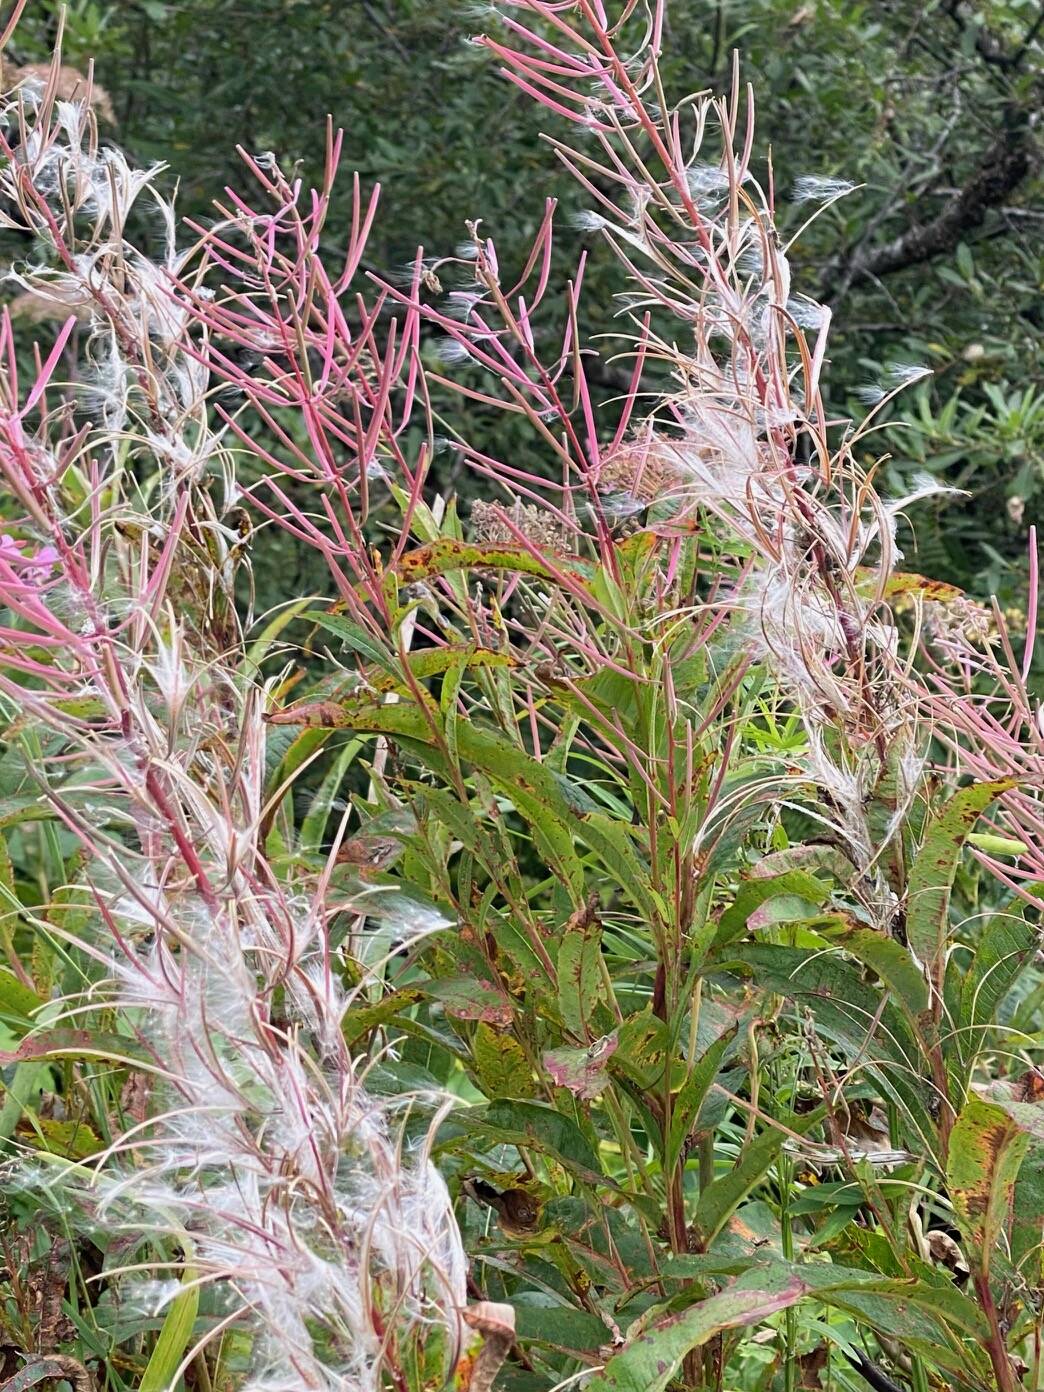 Fireweed fluff blowing in the wind in Cowee Meadow on Aug. 16. (Photo by Denise Carroll)